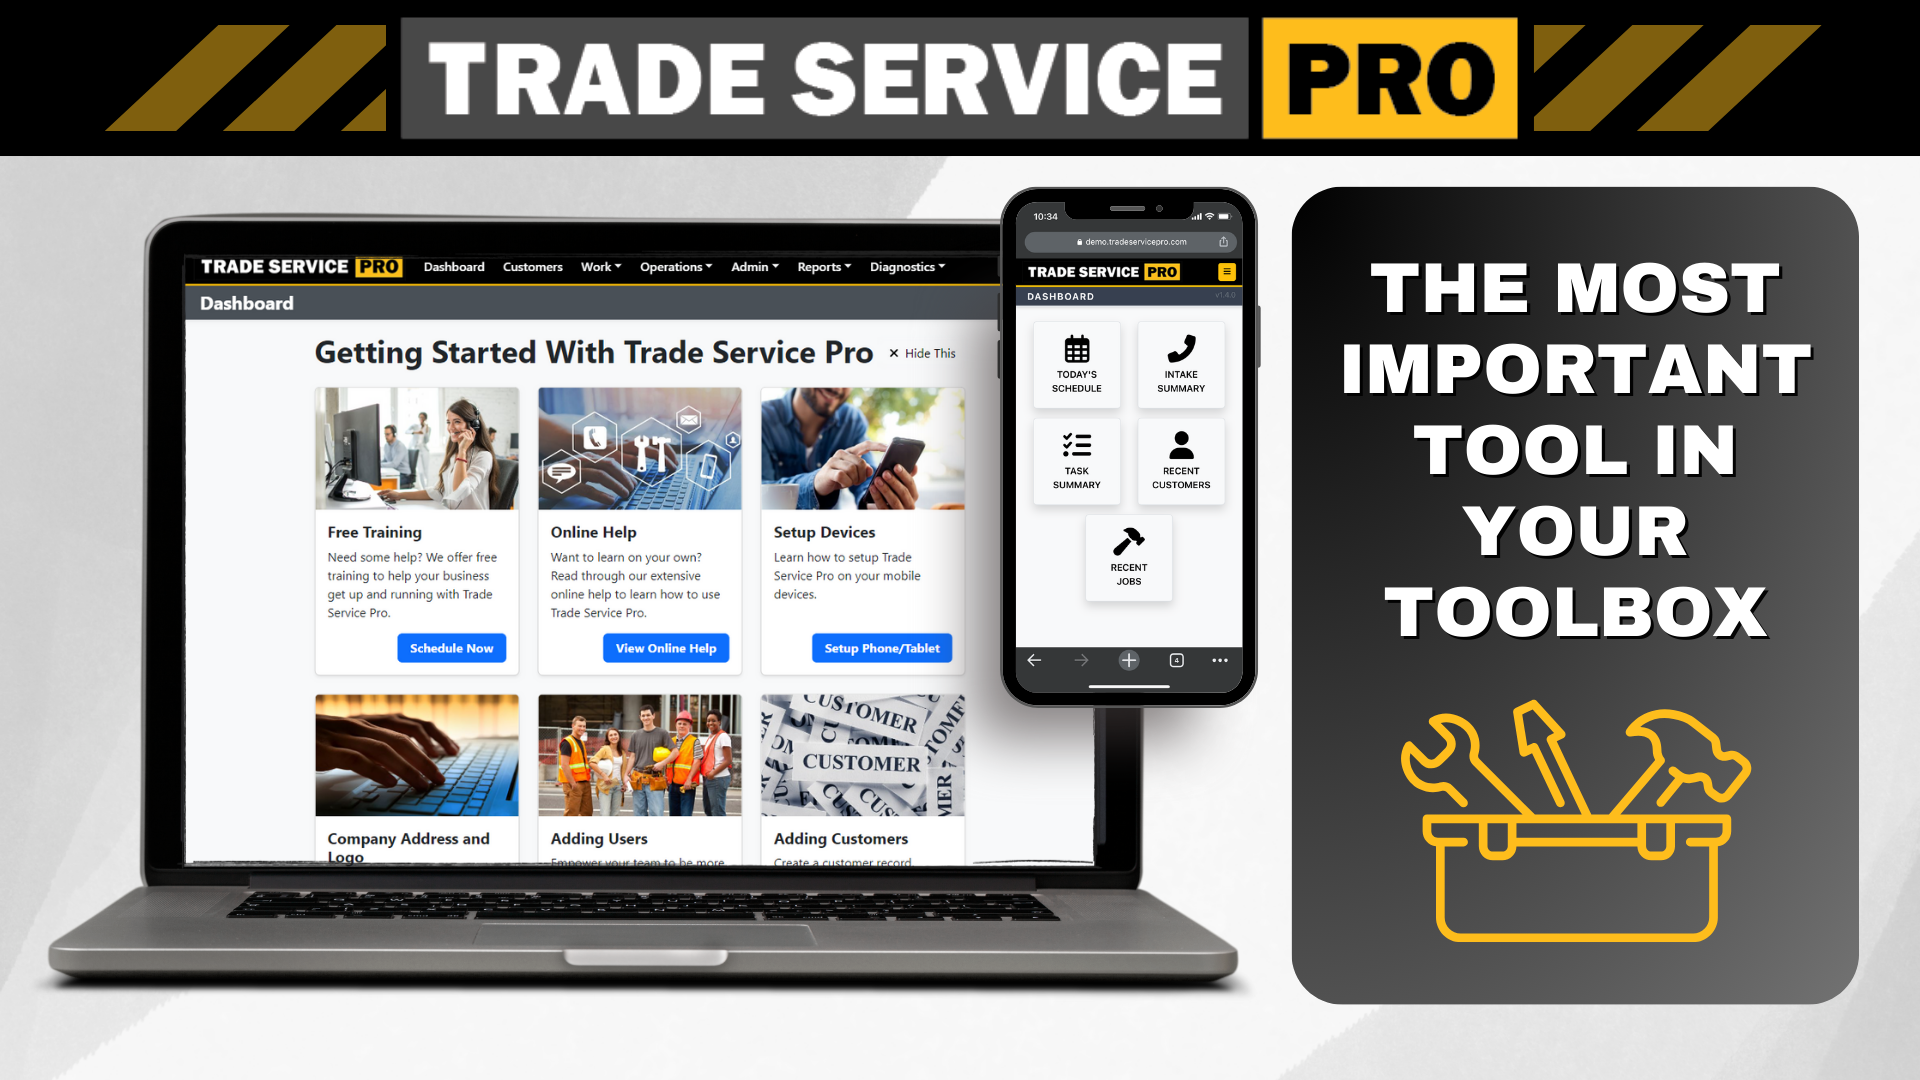 Trade Service Pro - the most important tool in your toolbox!